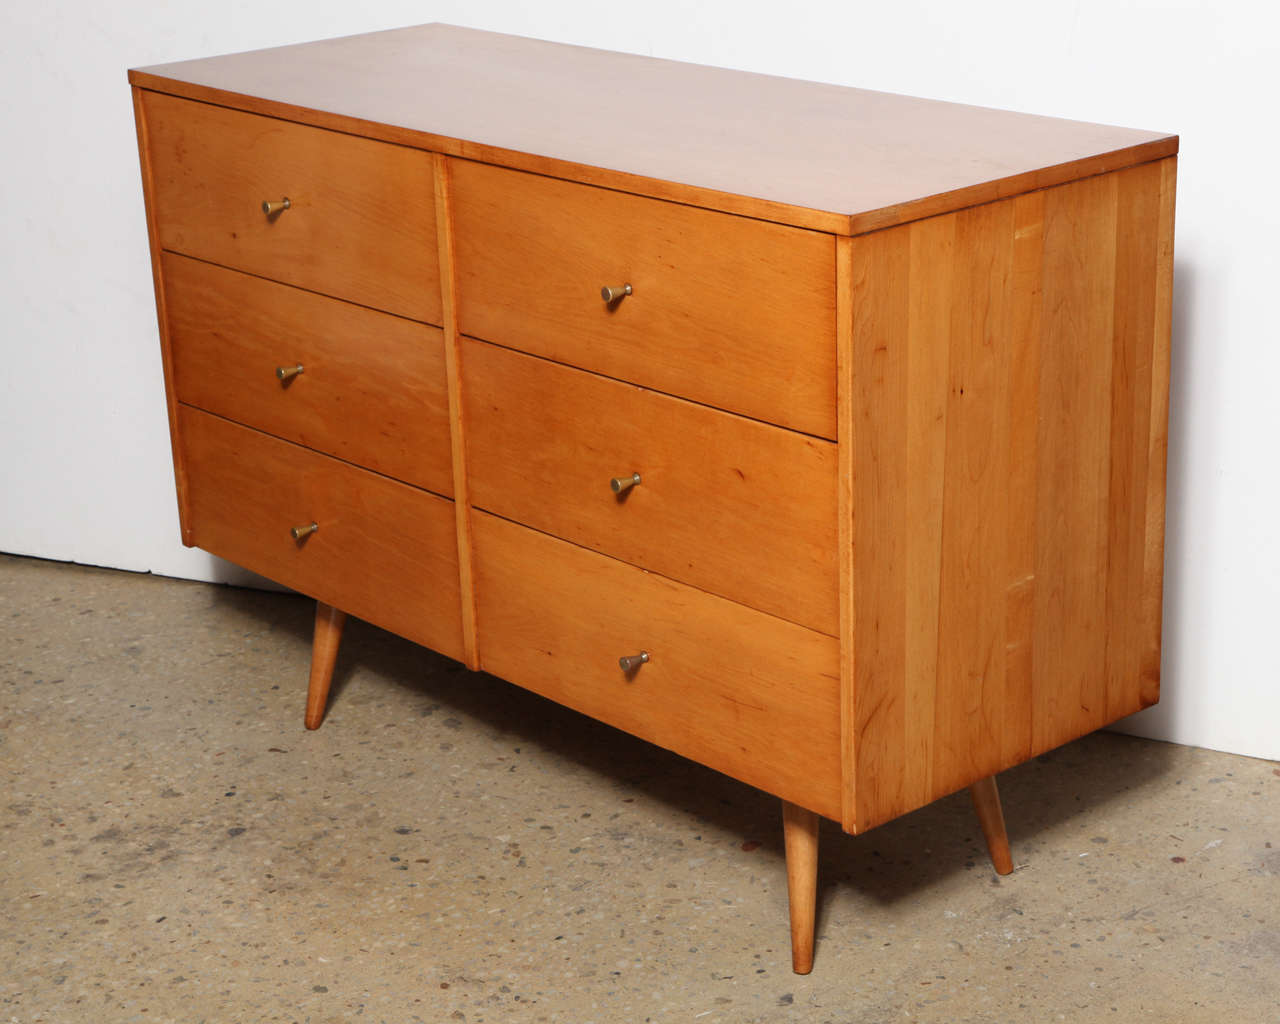 1950's 6 drawer double Planner Group Dresser by Paul McCobb for Winchendon Furniture.  With original Hourglass Brass pulls and tapered dowel legs.  Refinished